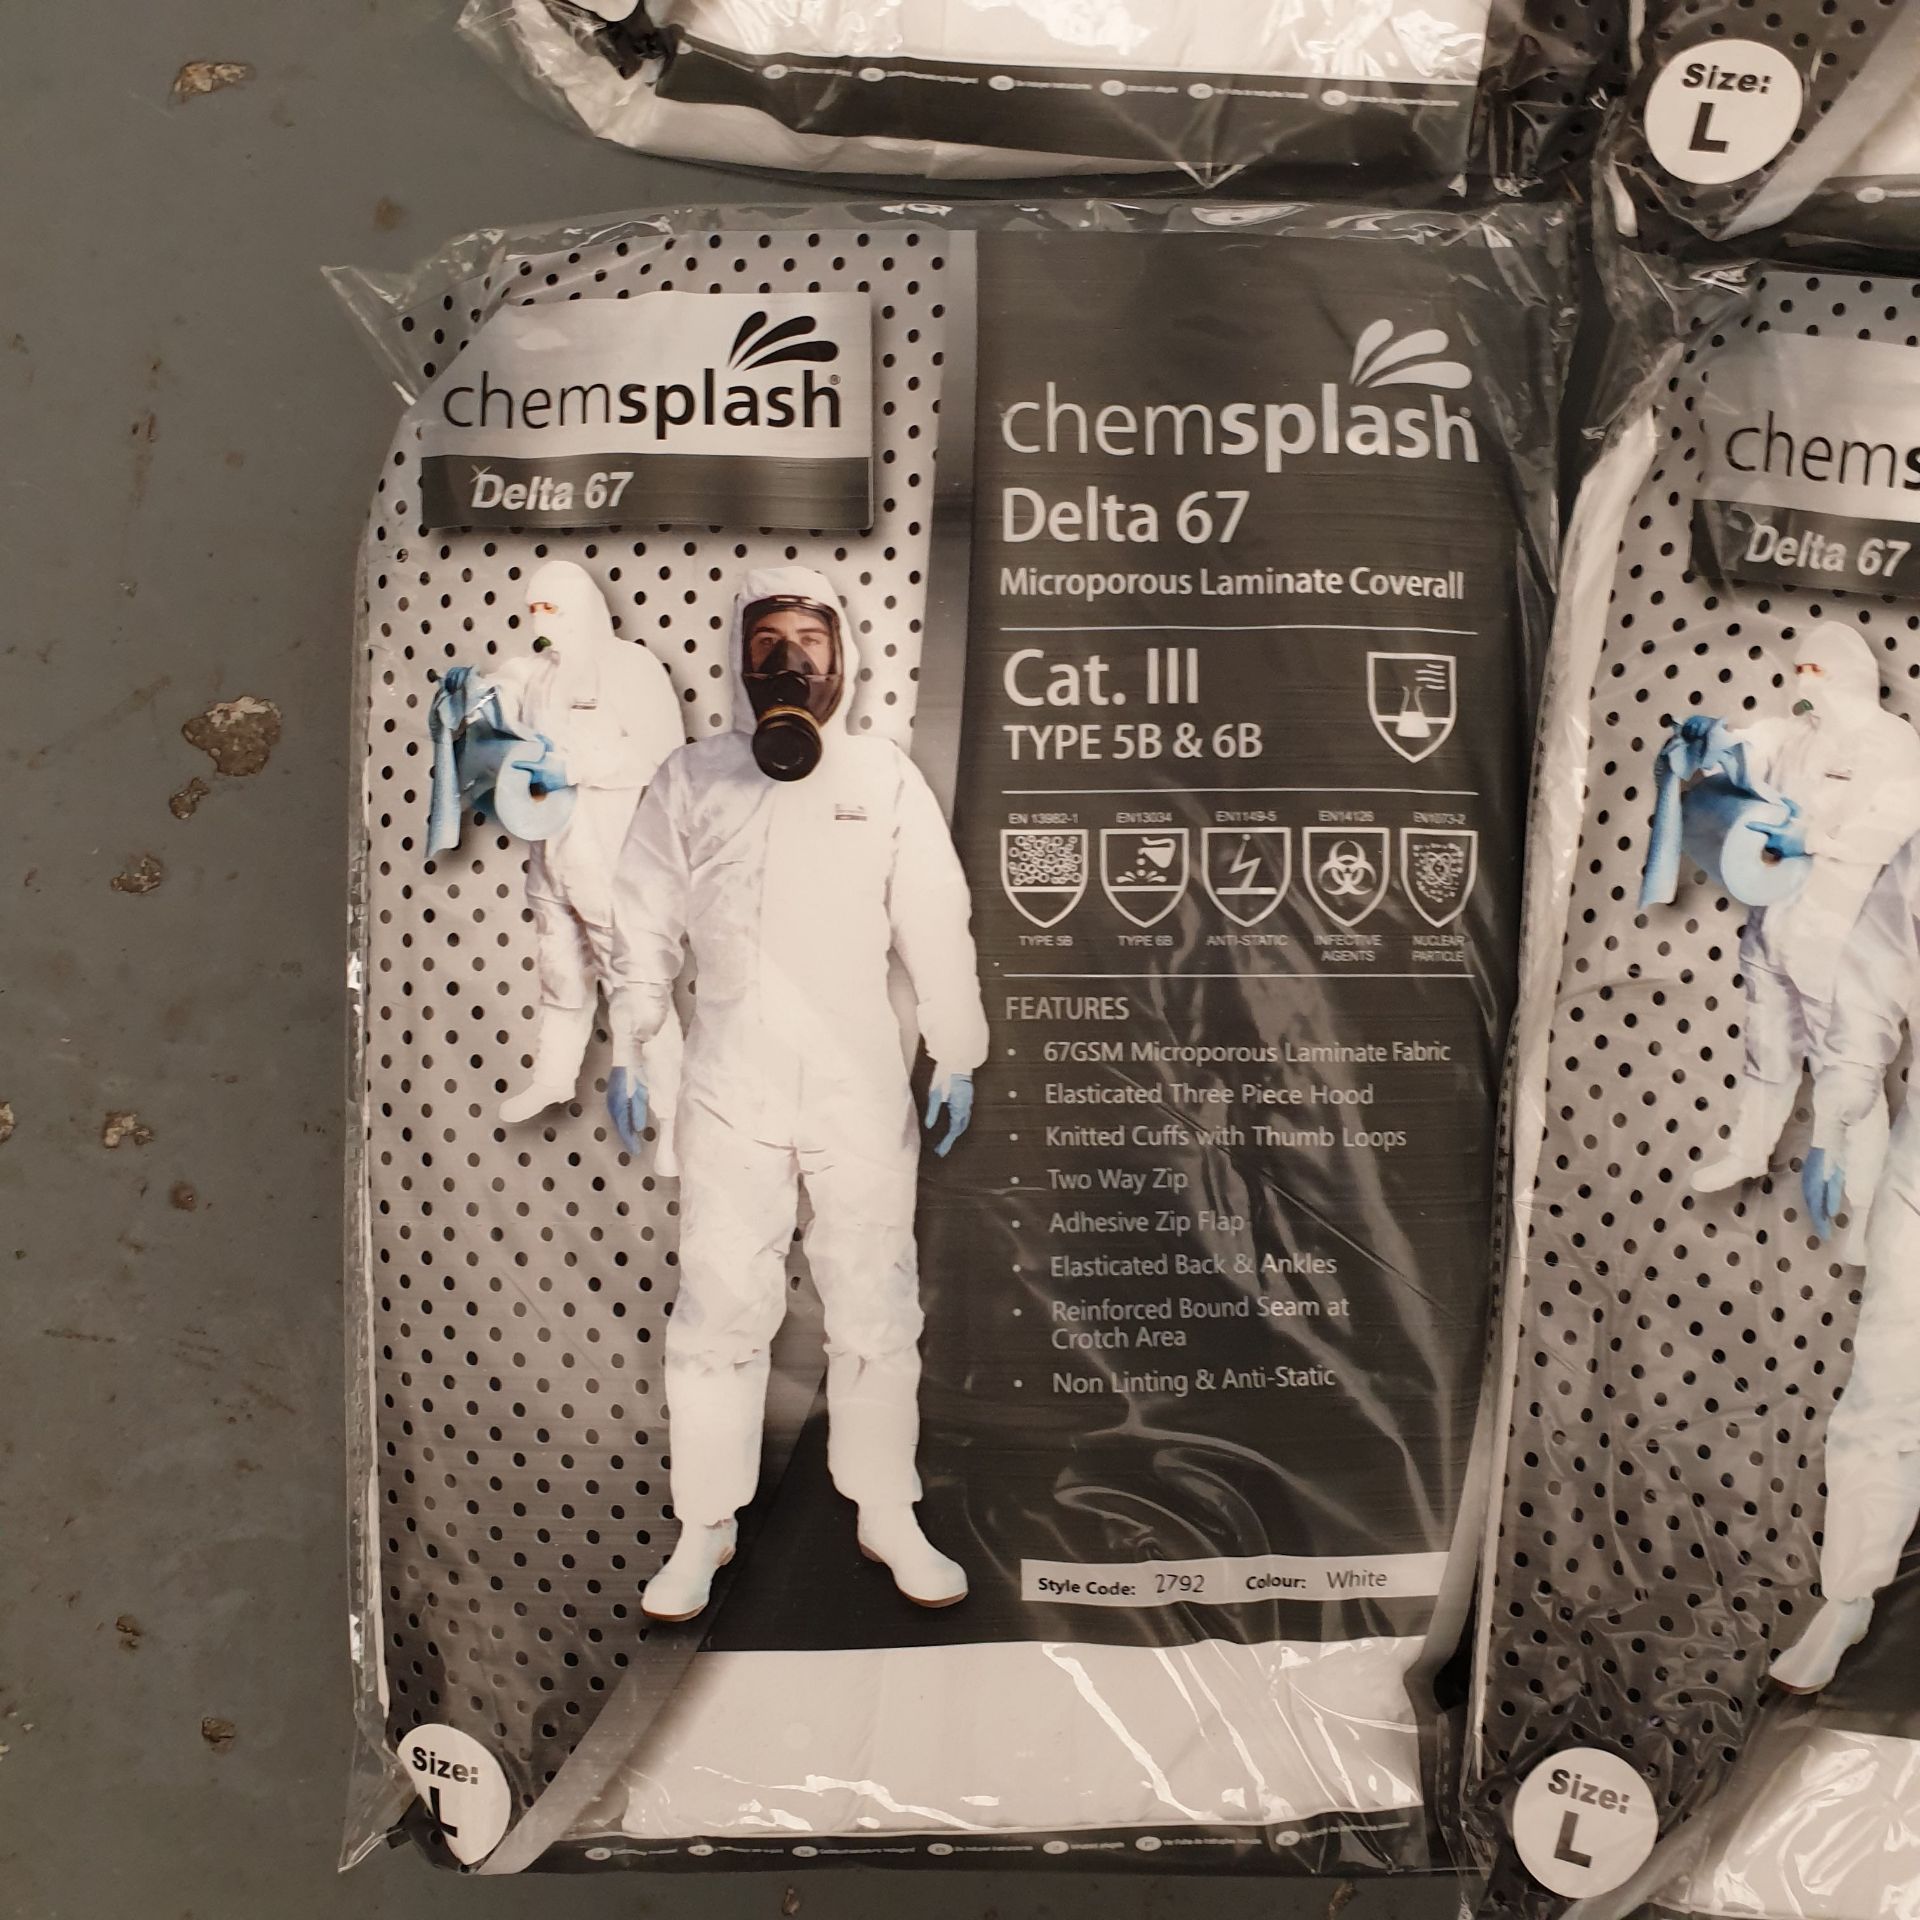 21 x Chemsplash Delta 67 Microporous Laminate Coverall Safety Suits With Hood. - Image 2 of 2